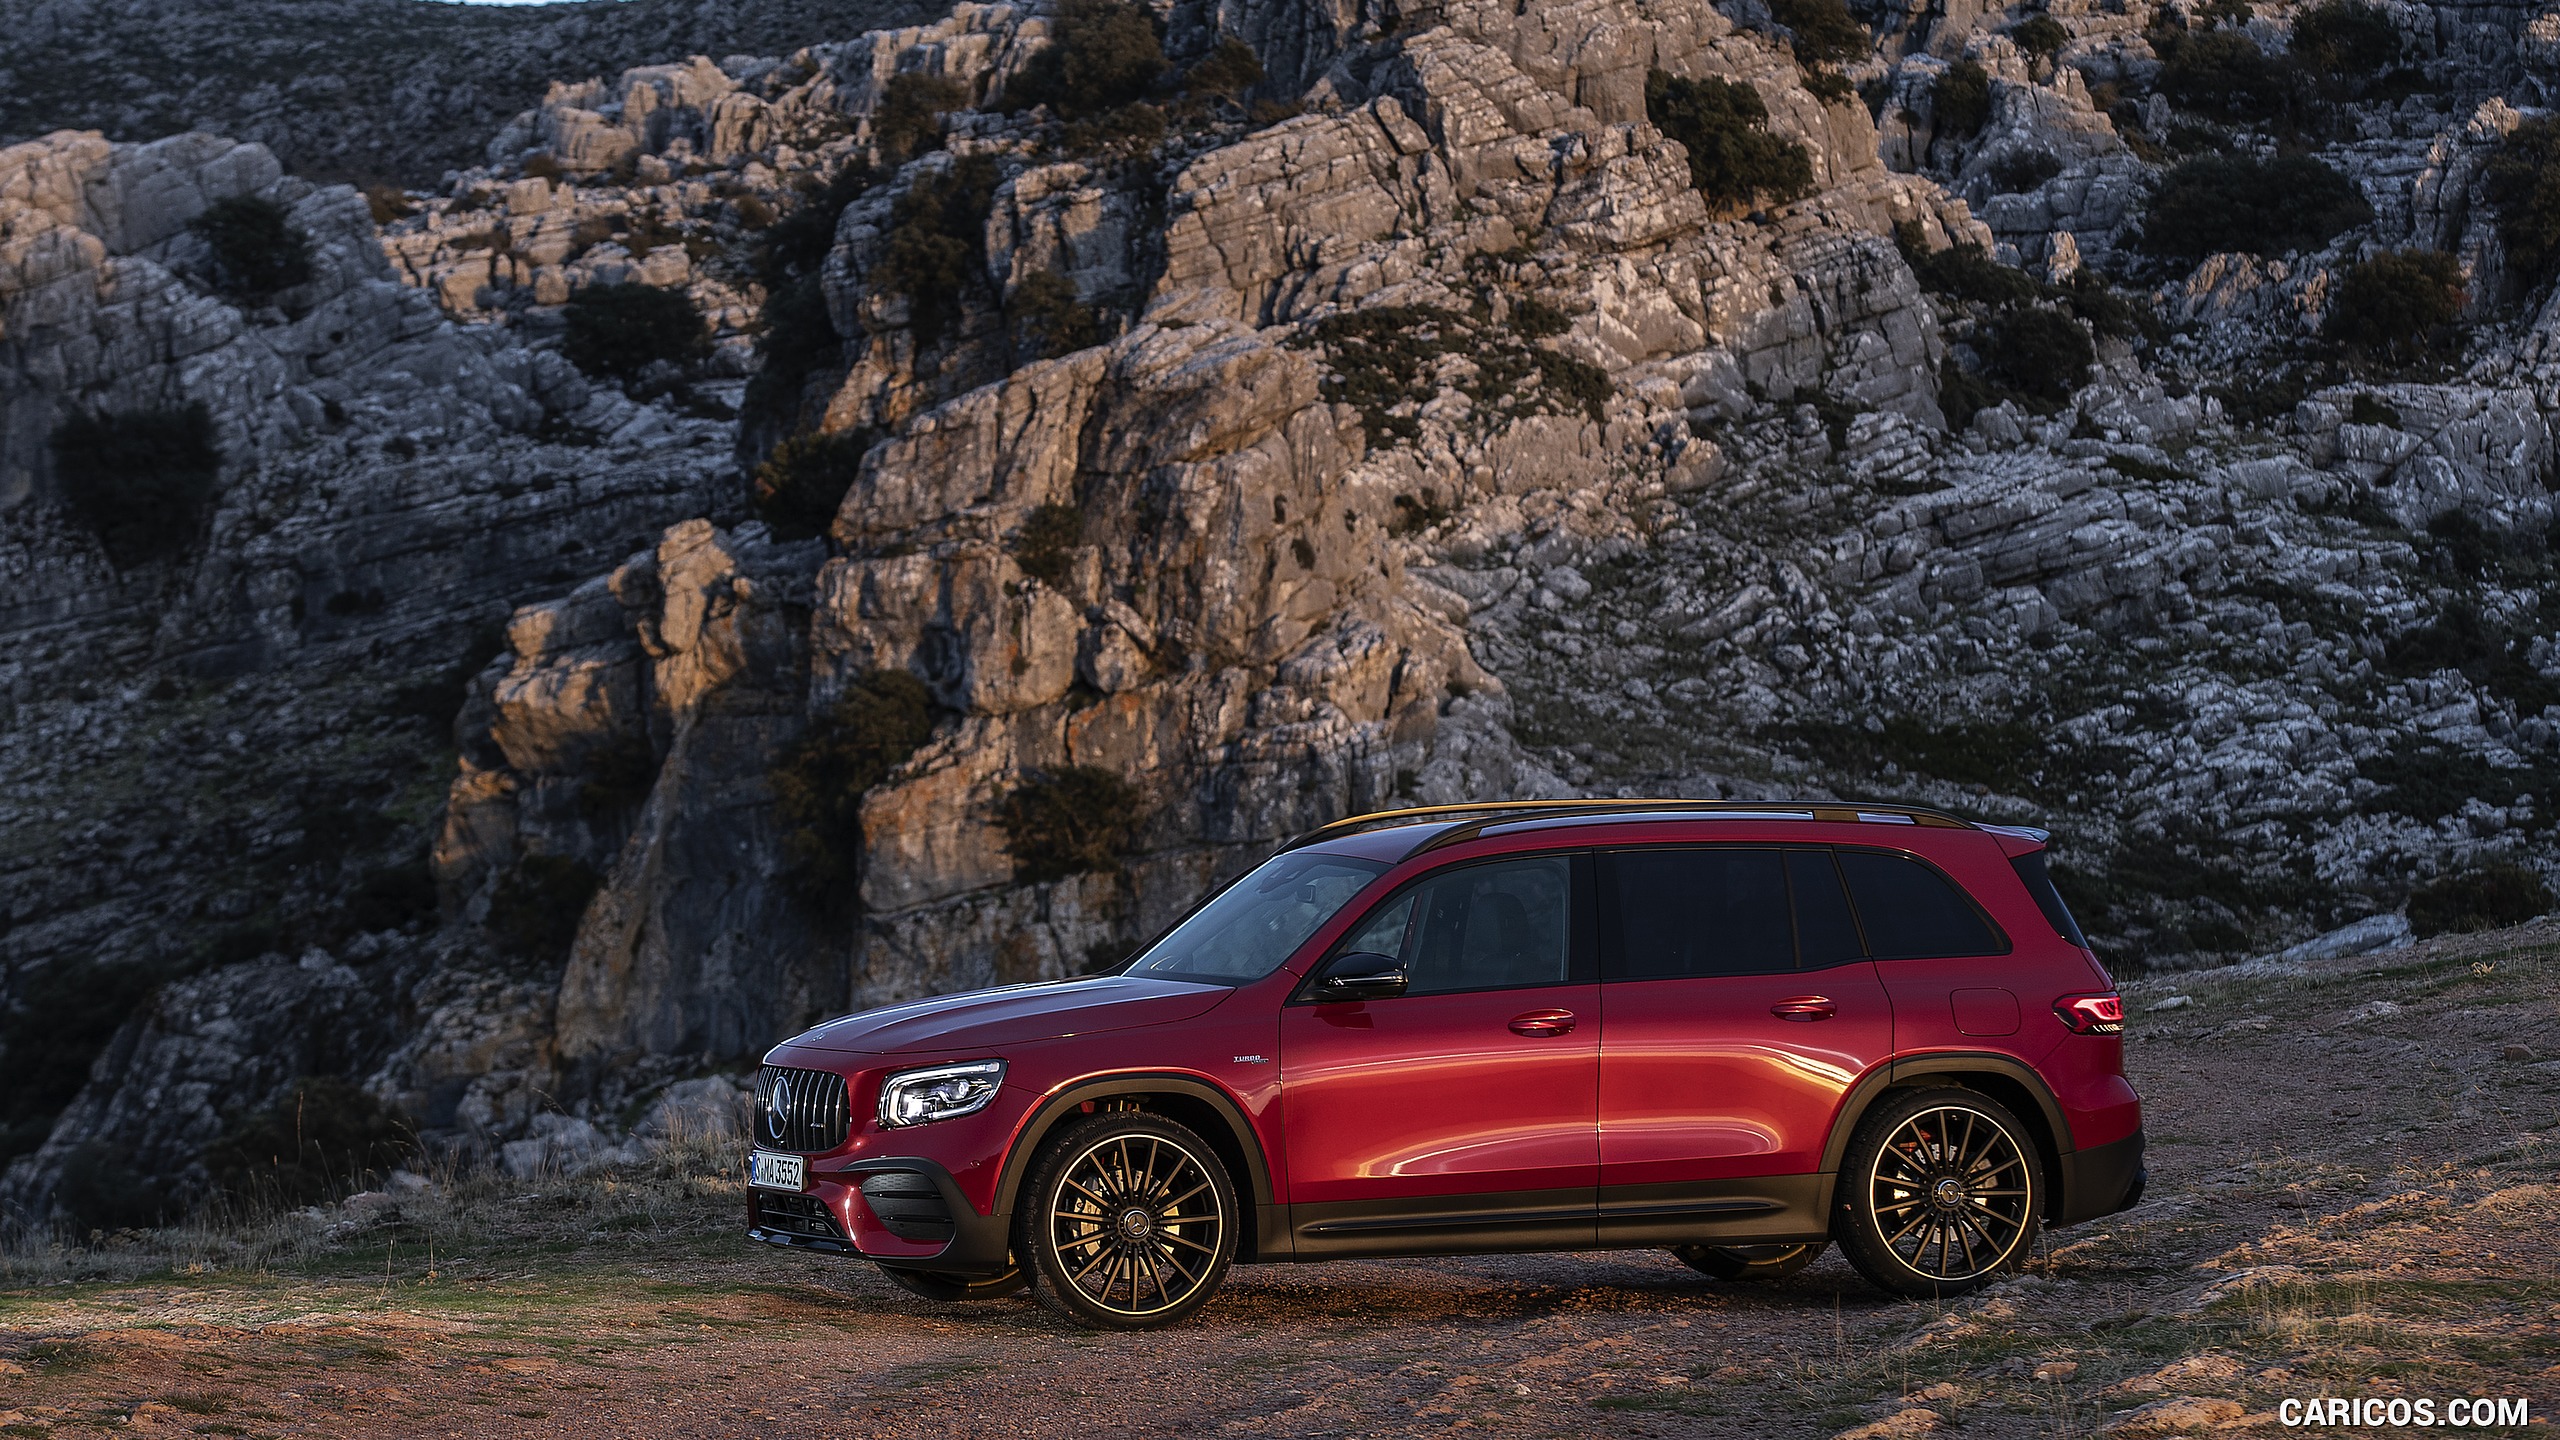 2021 Mercedes-AMG GLB 35 4MATIC (Color: Designo Patagonia Red Metallic) - Side, #37 of 95